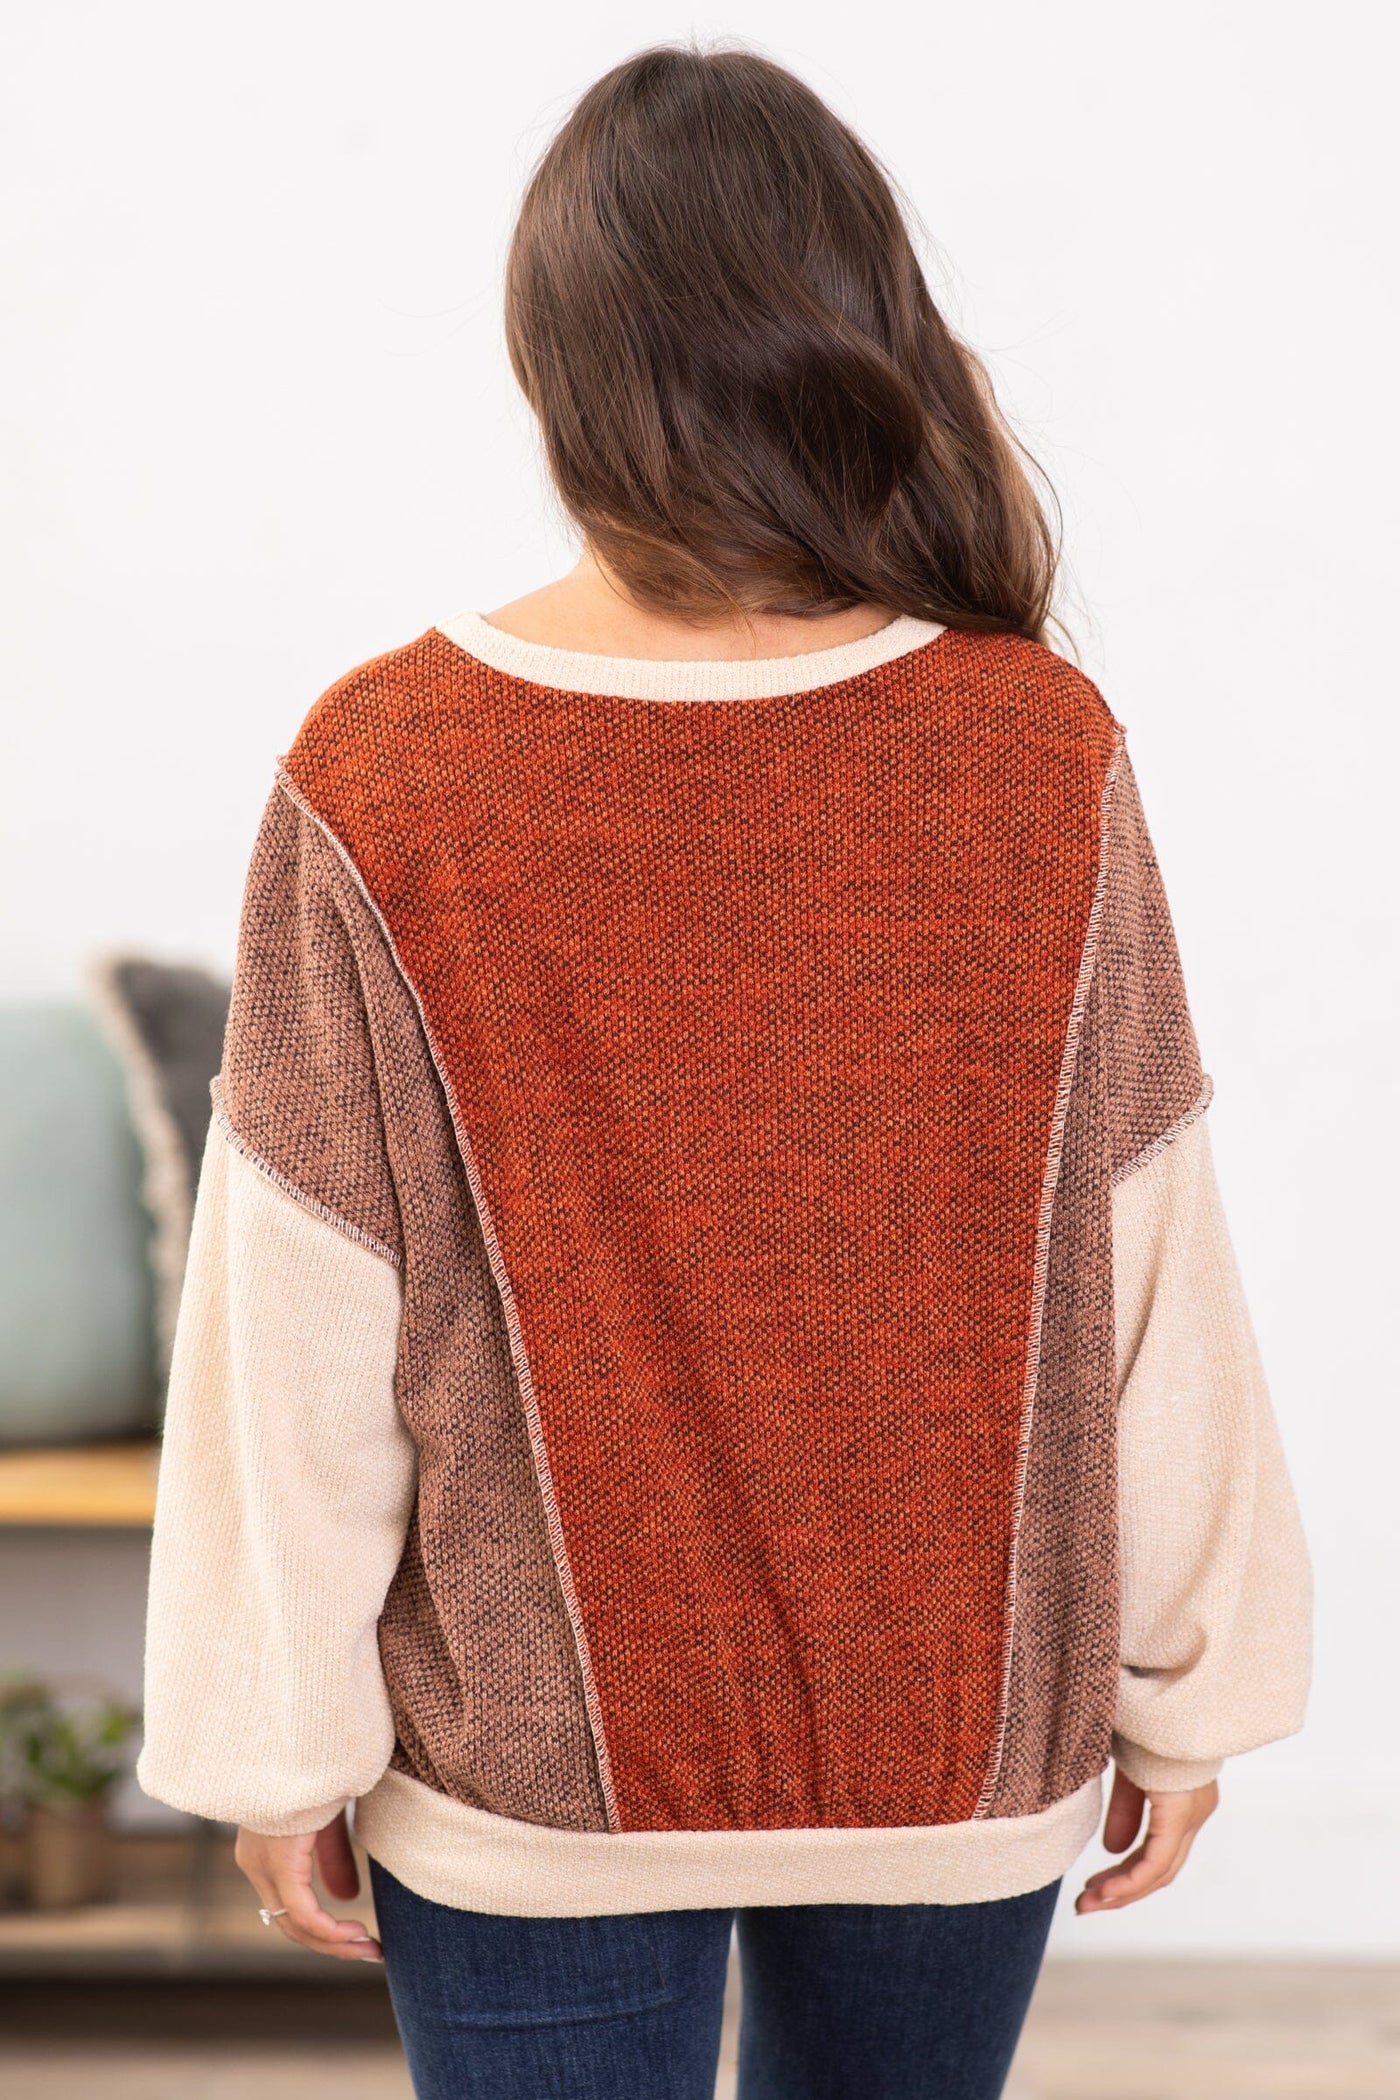 Rust and Mocha Colorblock Textured Top - Filly Flair